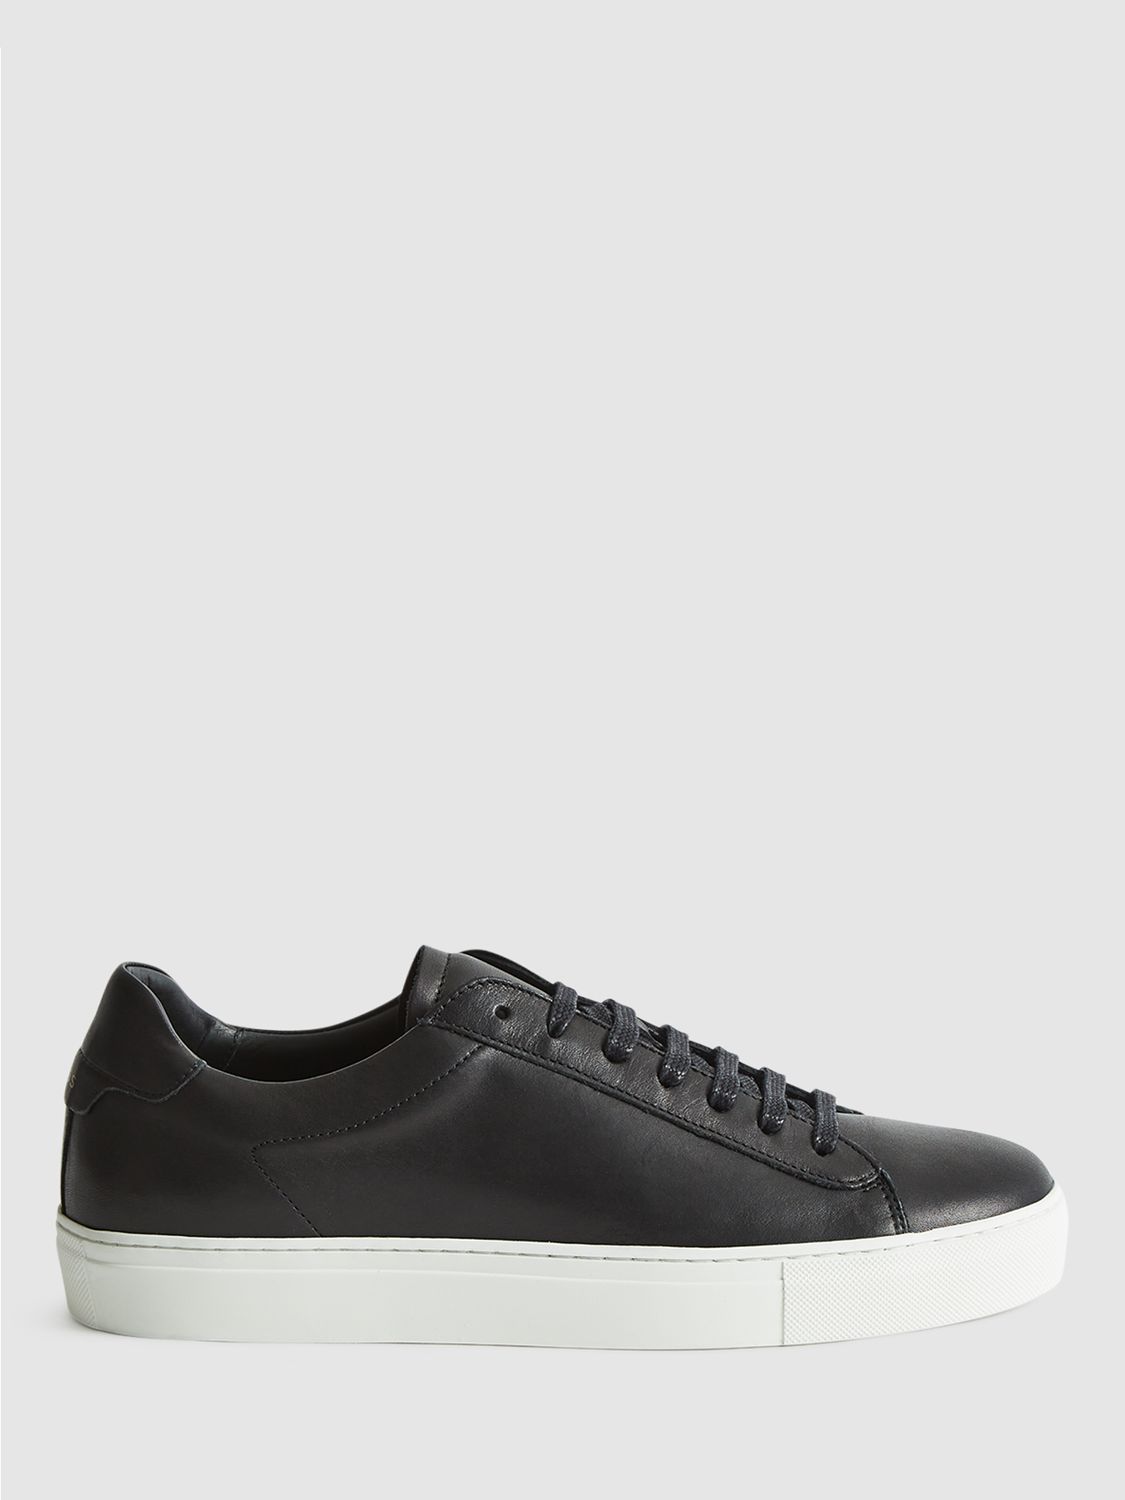 Reiss Finley Leather Trainers, Black at John Lewis & Partners